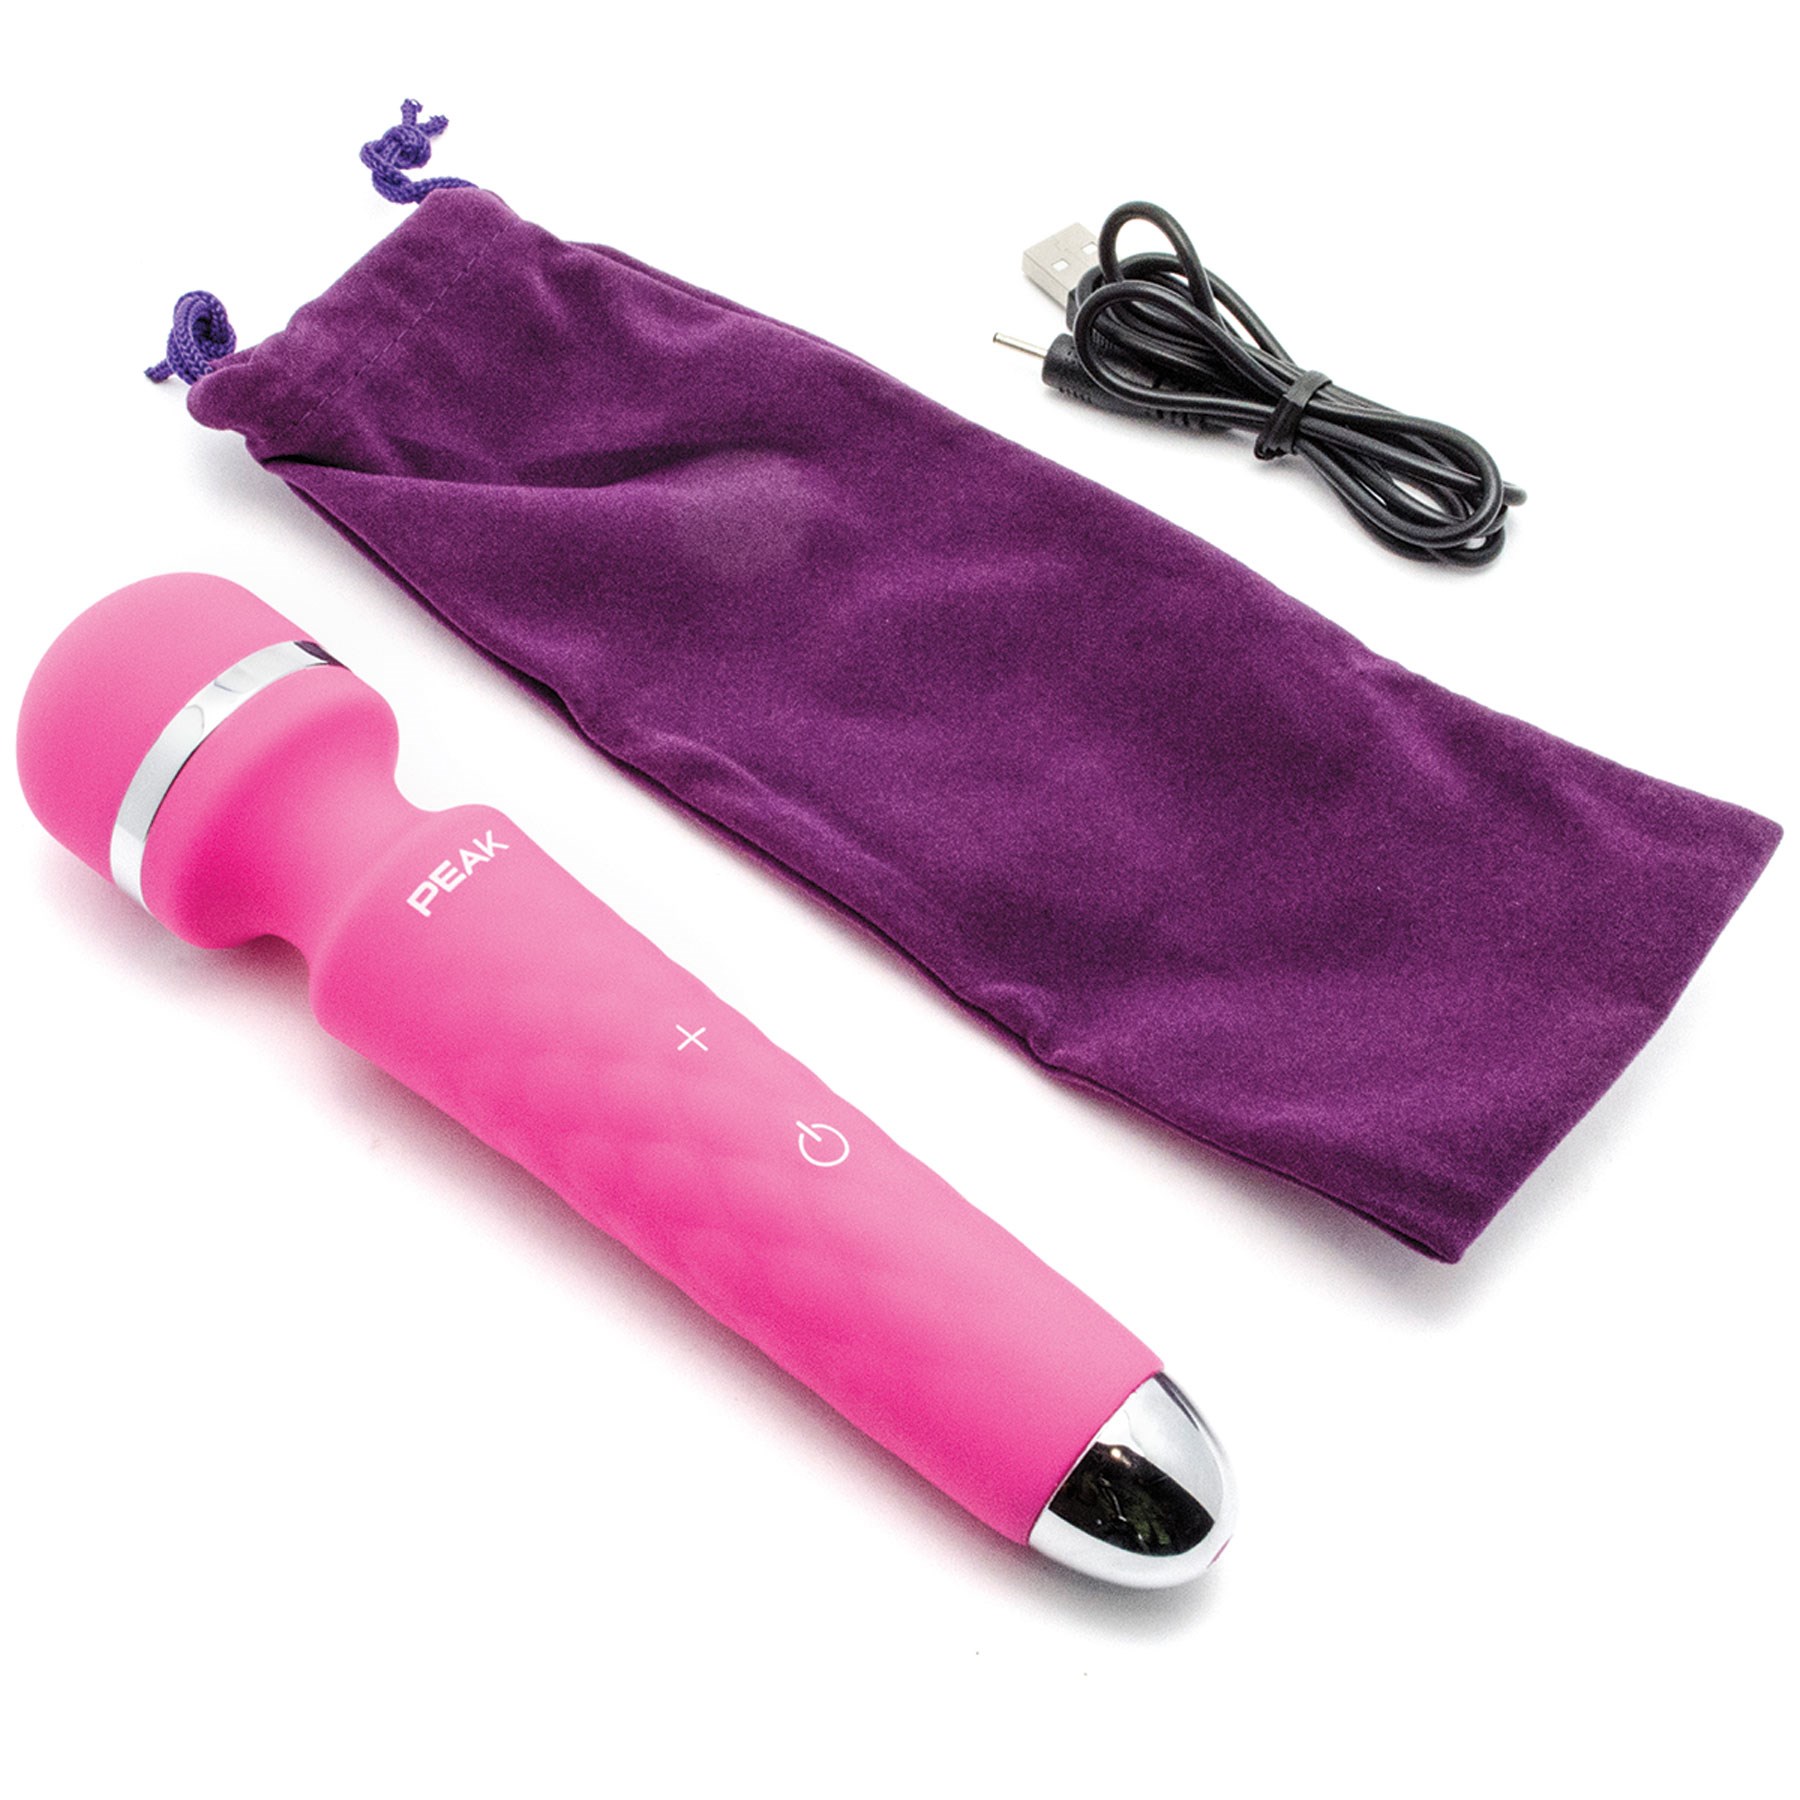 Pure Enrichment Peak Wand Massager with storage bag and charger